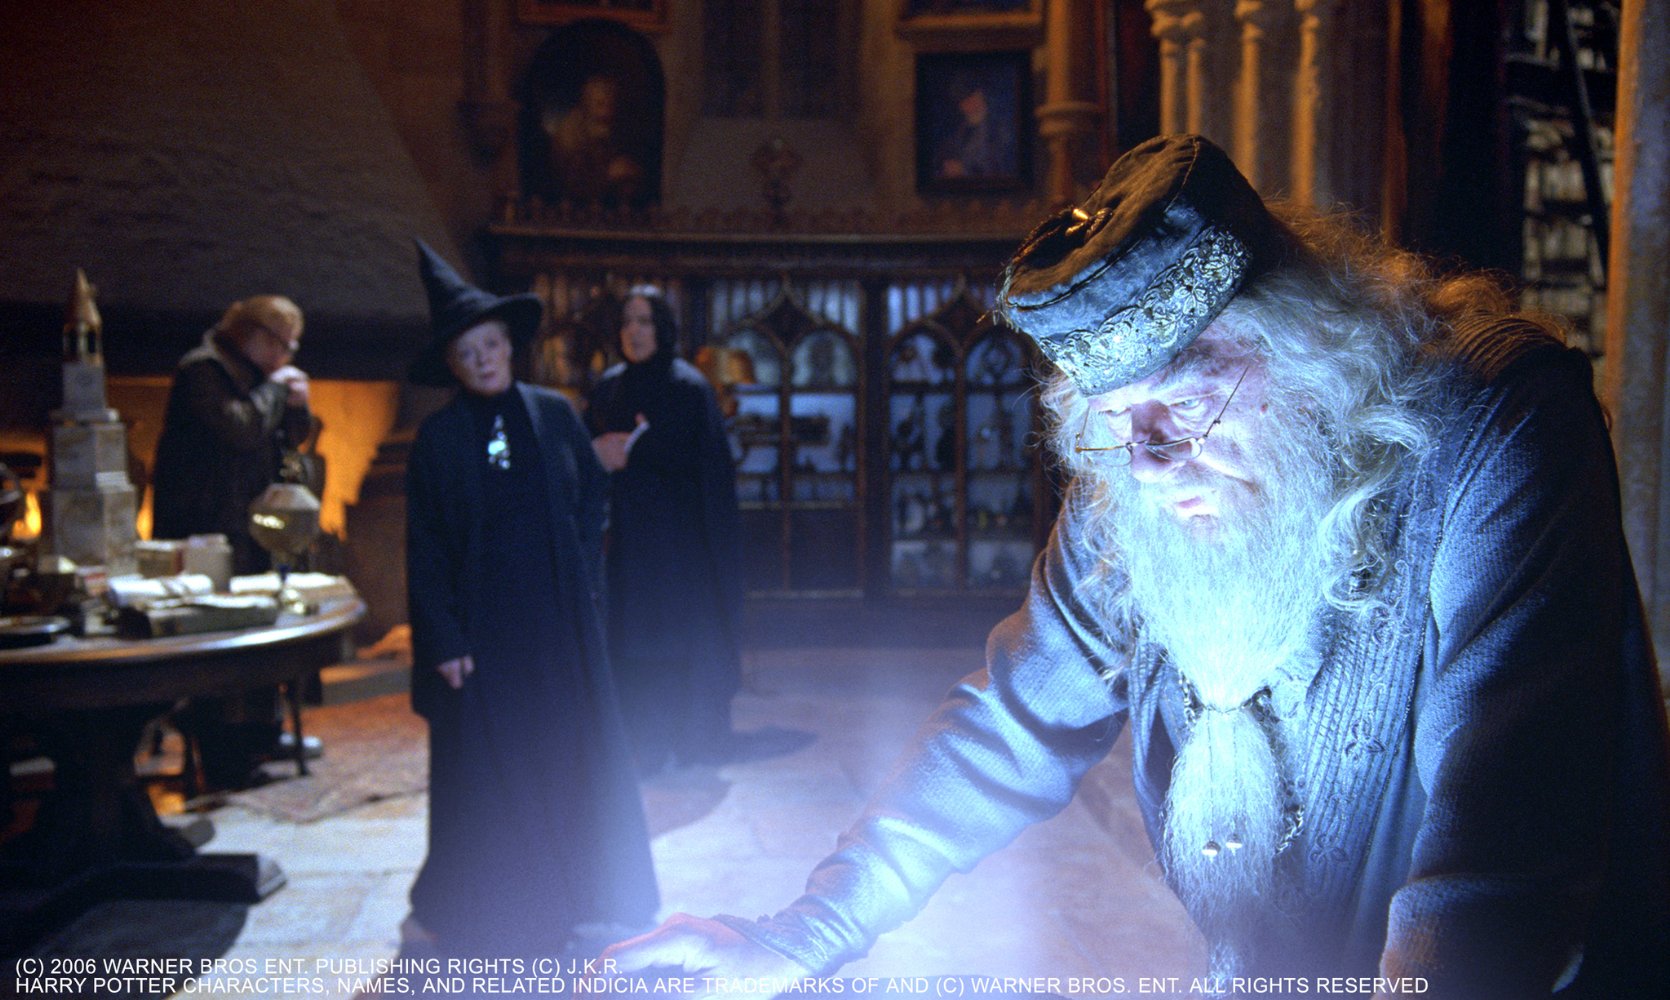 Harry Potter And The Goblet Of Fire 2005 Watch Online on 123Movies!1670 x 1000